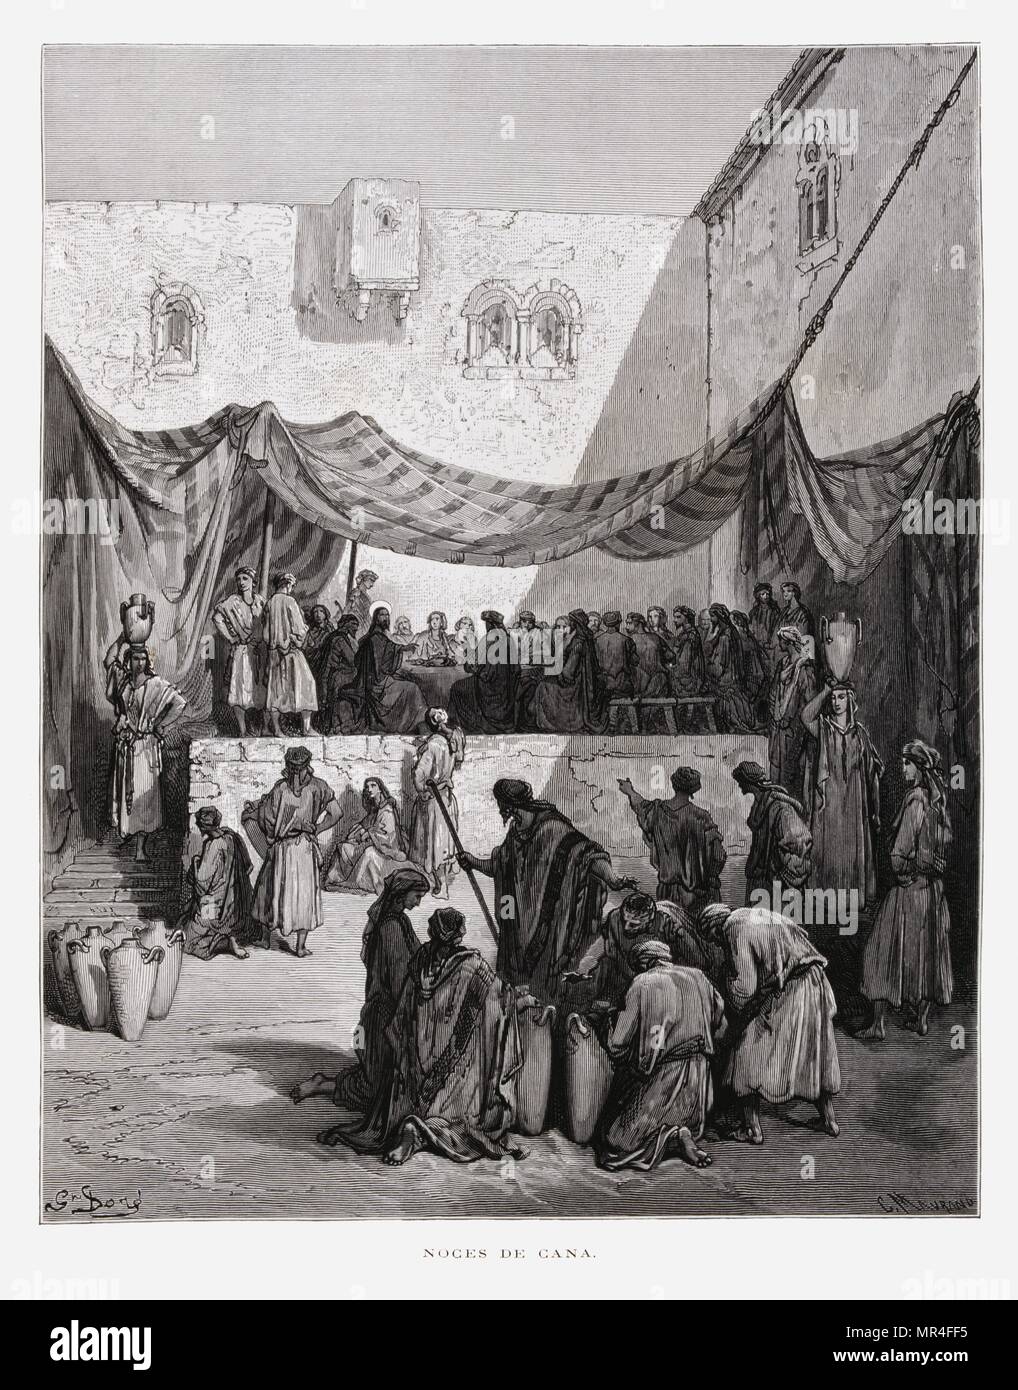 The Feast at Cana, Illustration from the Dore Bible 1866. In 1866, the French artist and illustrator Gustave Dore (1832–1883), published a series of 241 wood engravings for a new deluxe edition of the 1843 French translation of the Vulgate Bible, popularly known as the Bible de Tours. New edition known as La Grande Bible de Tours illustrations were immensely successful. The Wedding at Cana (1563, also The Wedding Feast at Cana), by Paolo Veronese, is a representational painting that depicts the Bible story of the Marriage at Cana, a wedding banquet at which Jesus converts water to wine Stock Photo